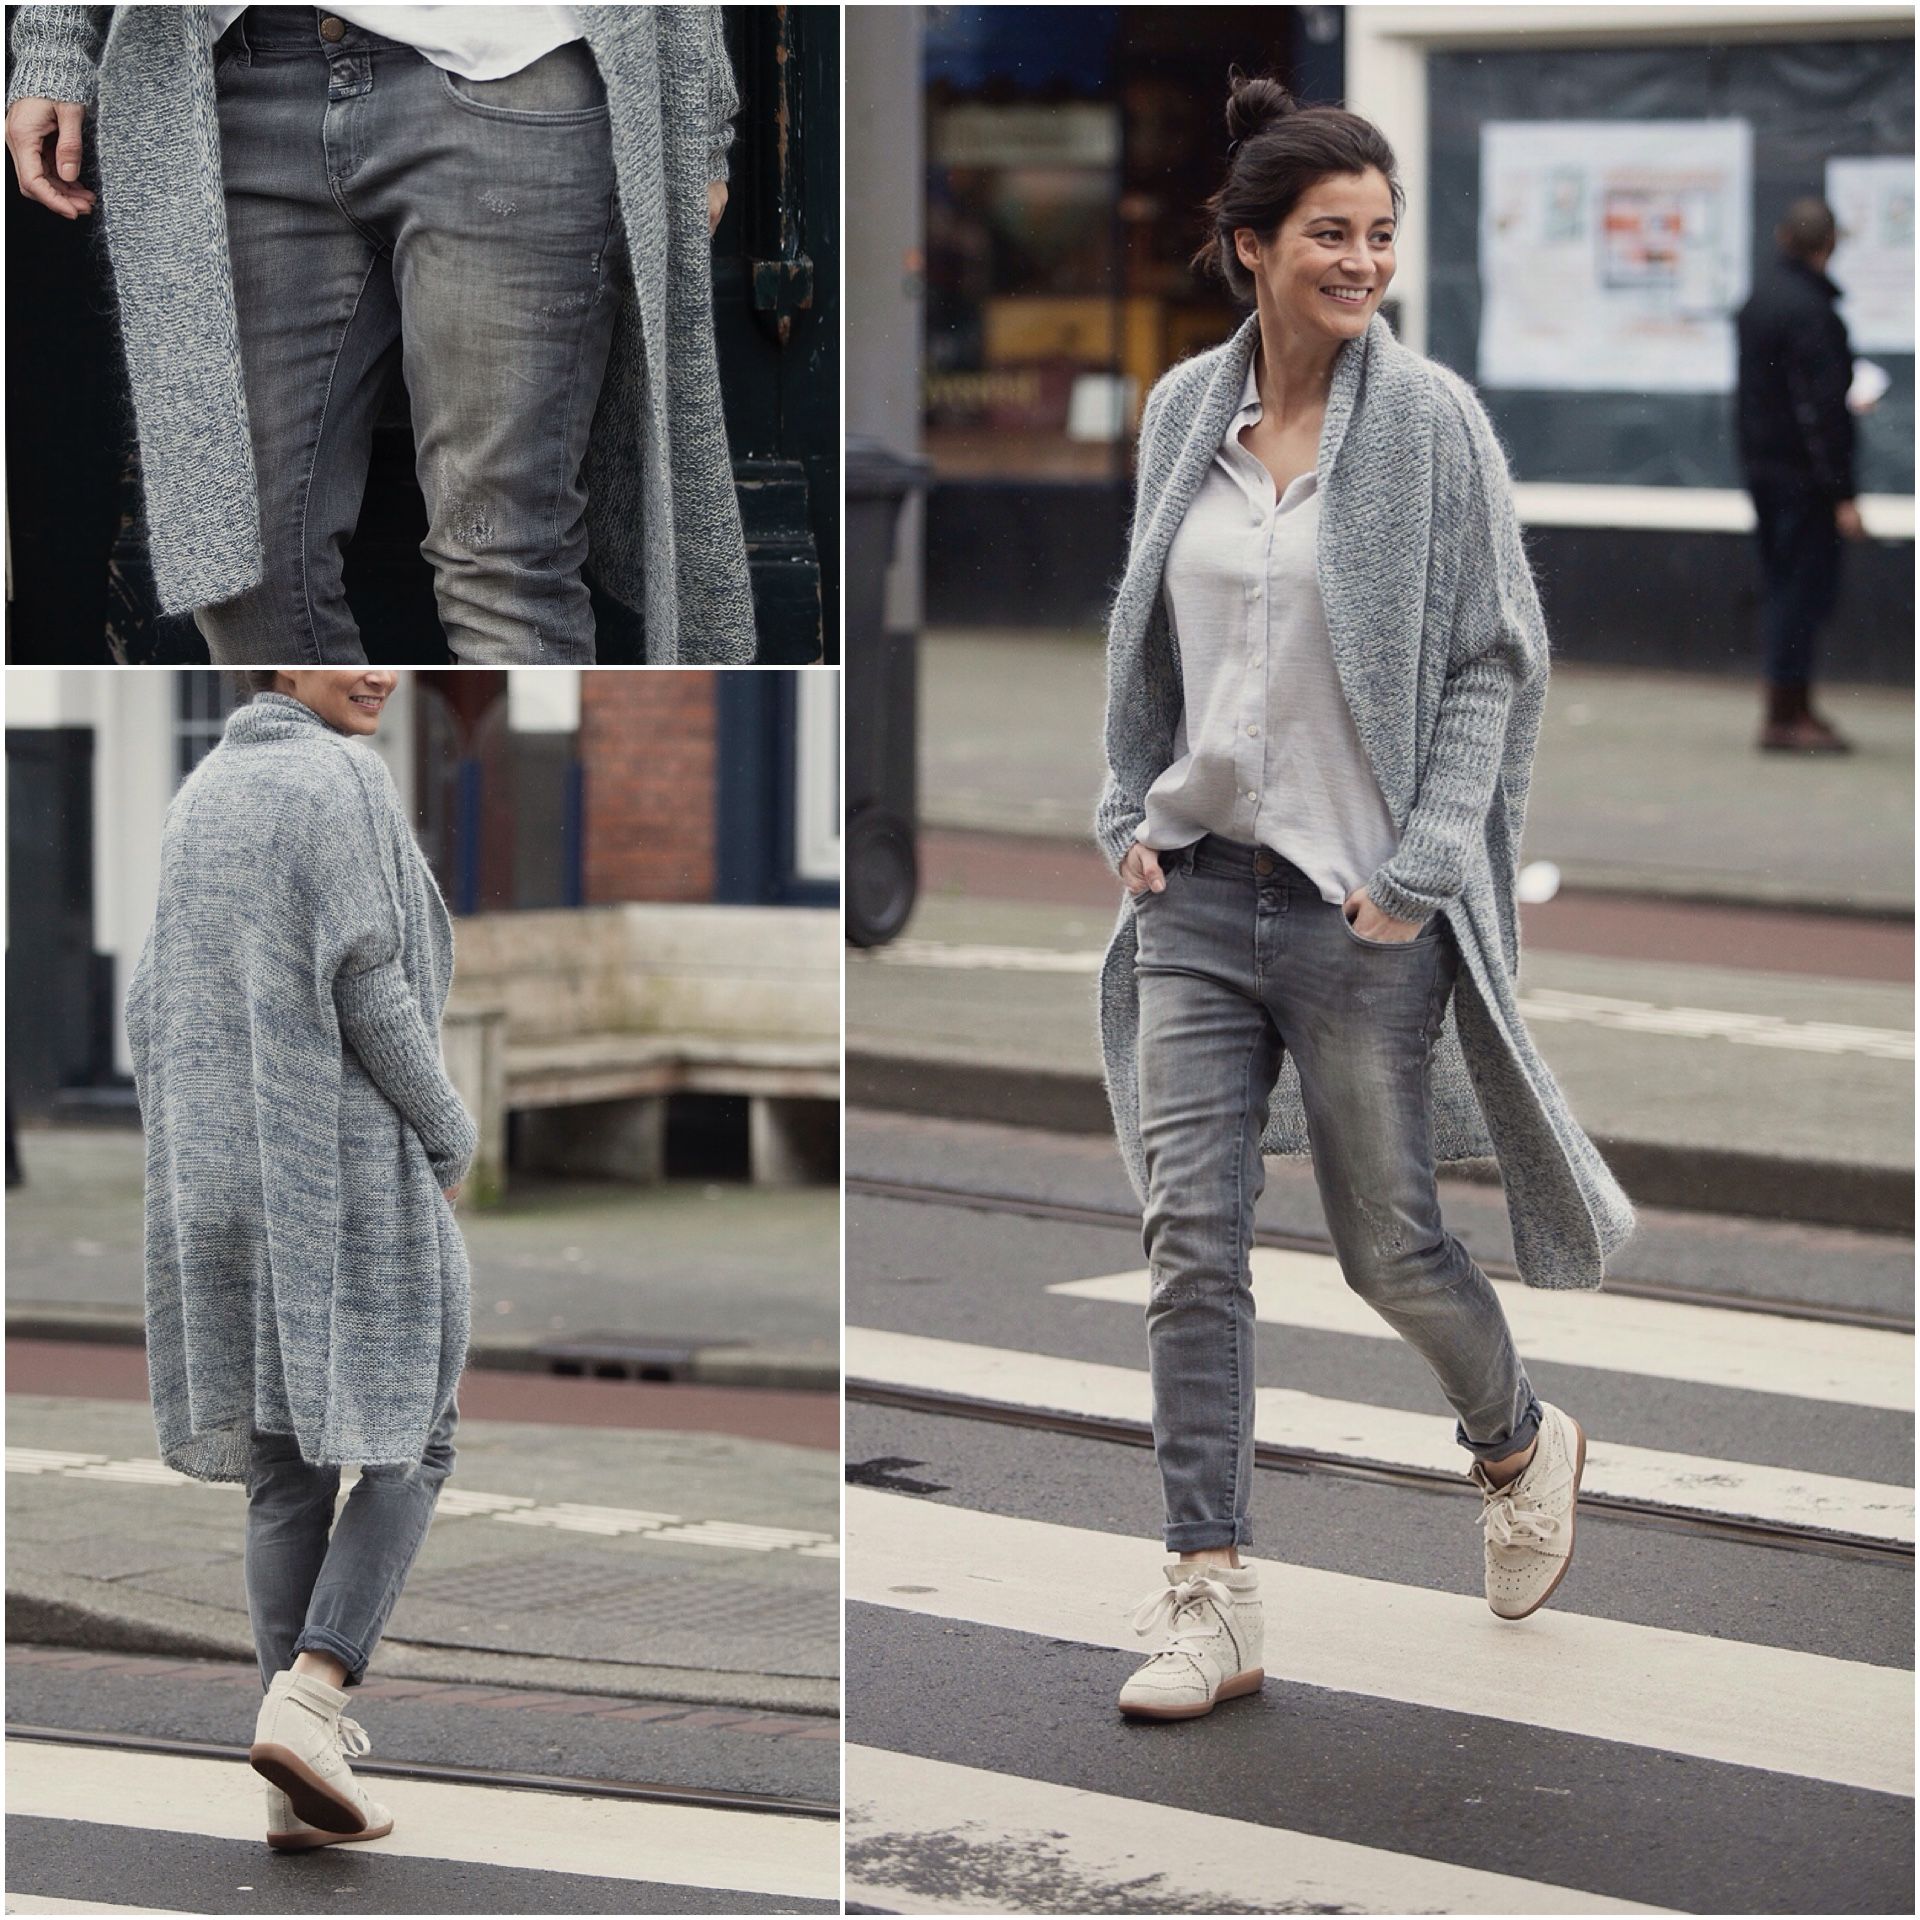 streetstyle spring 2016 long knitted cardigan and boyfriend skinny jeans, bobby snaeakers isabel Marant by BlogForShops